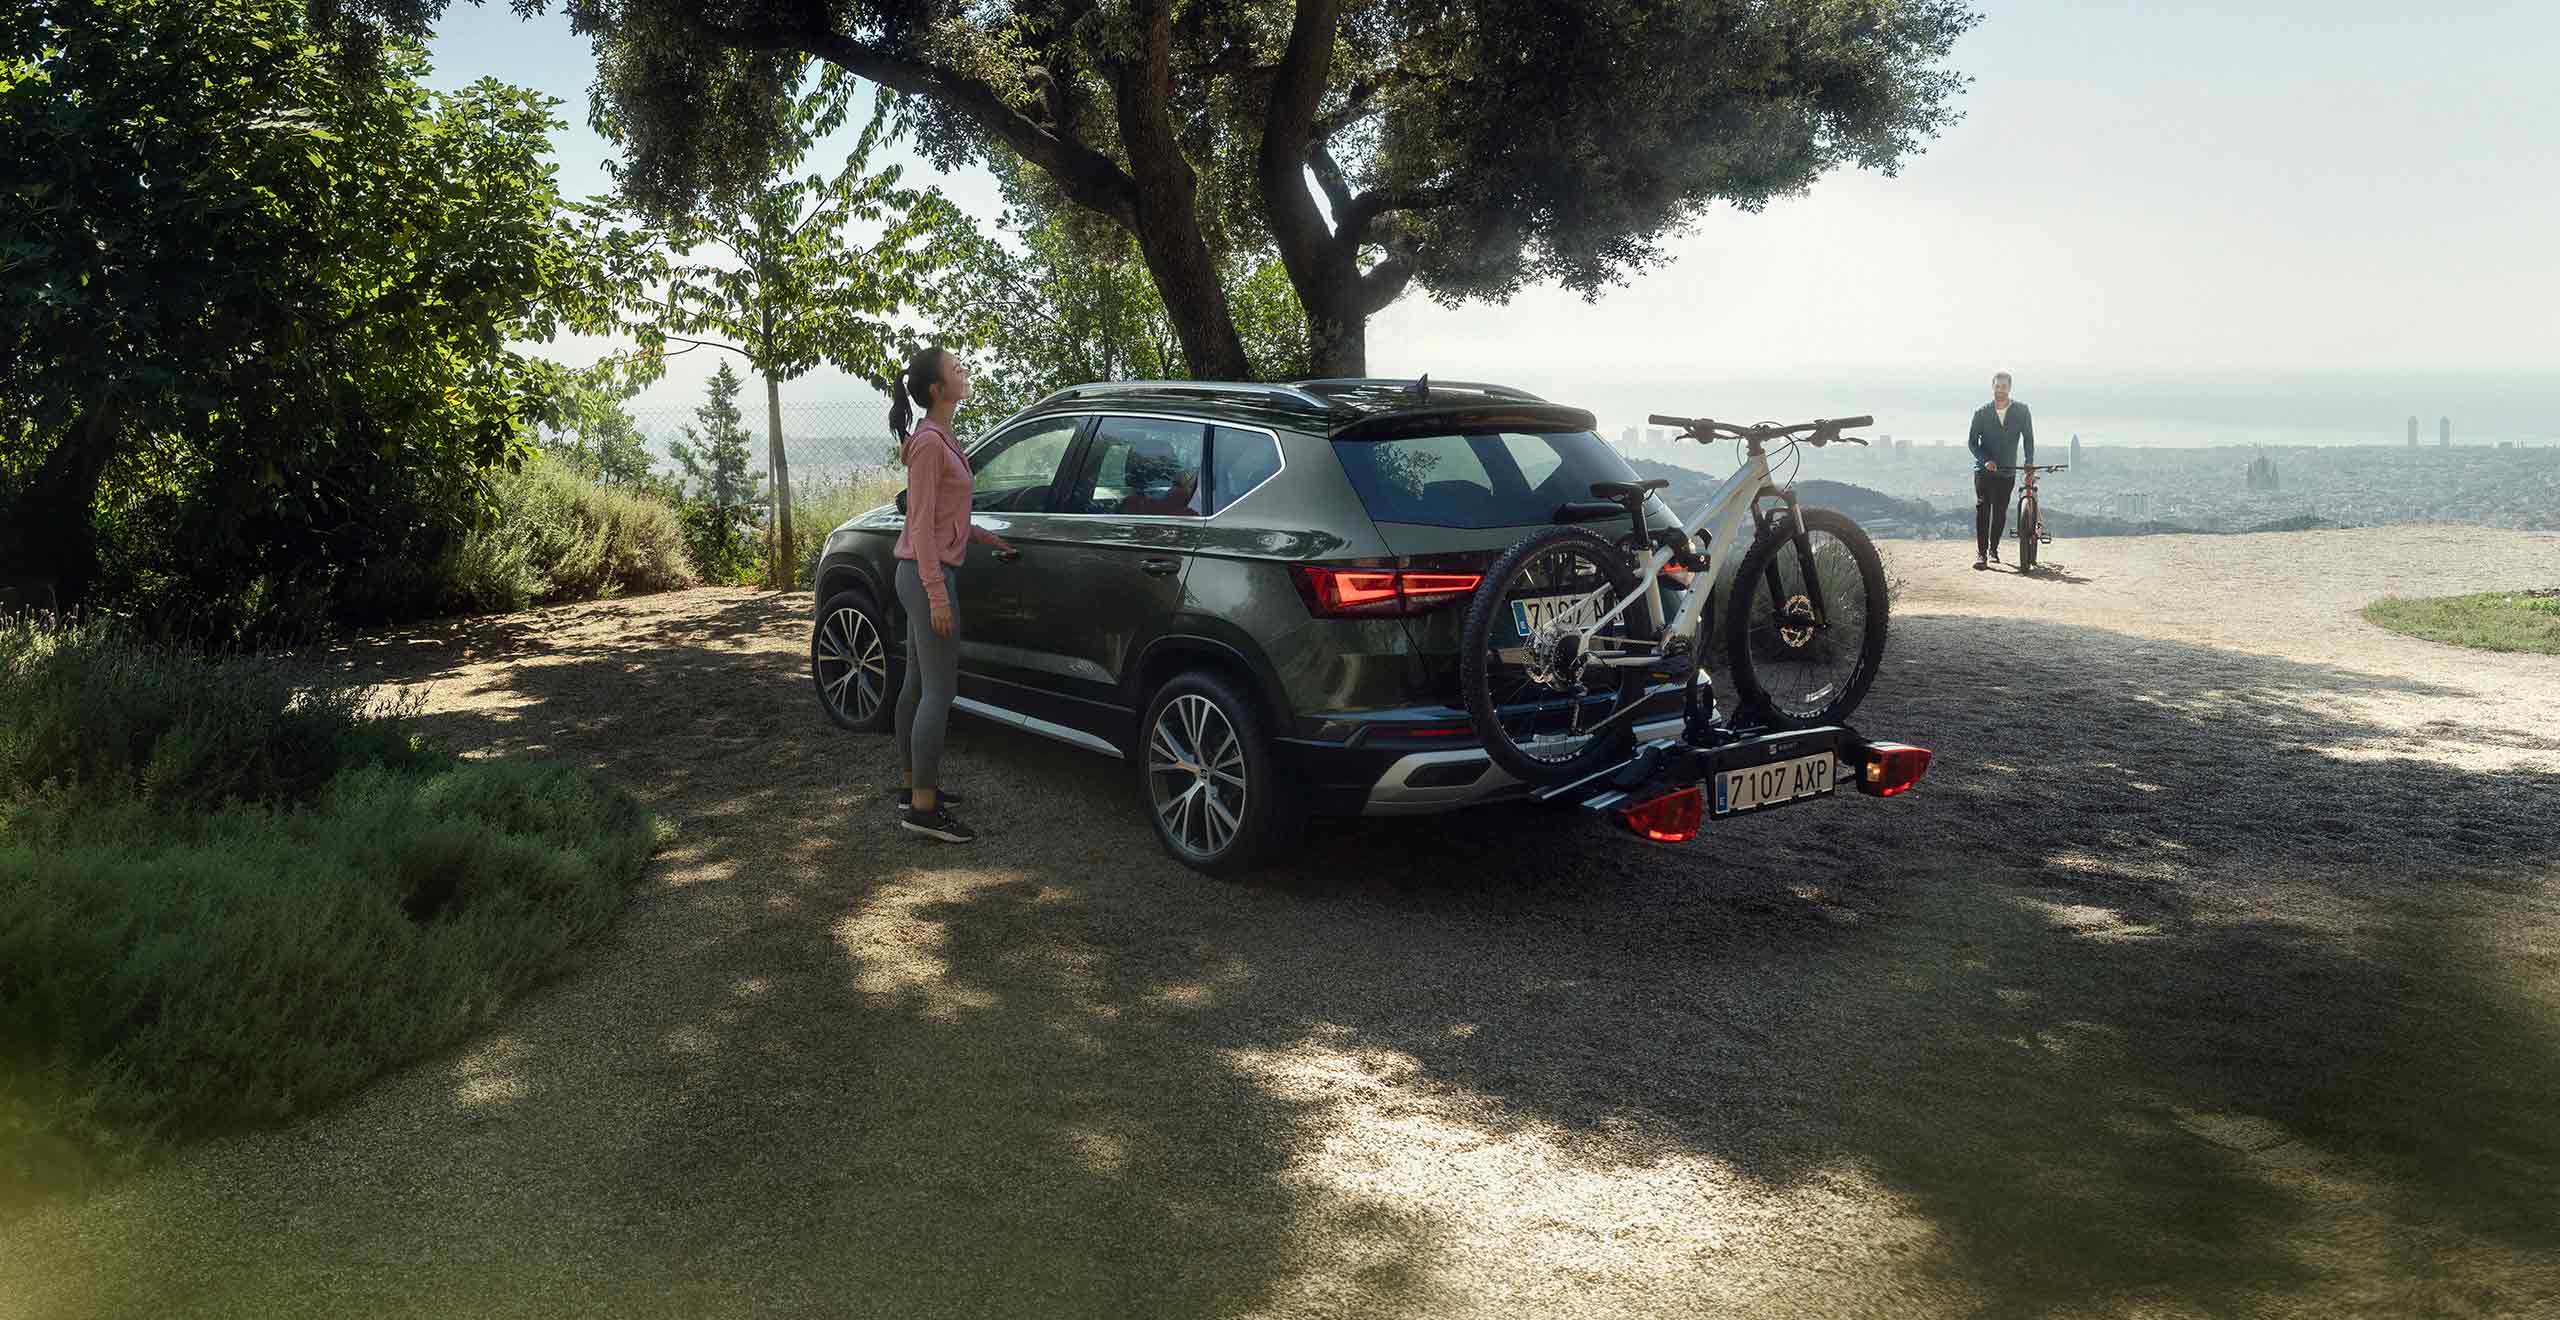 Towing-car-bike-rack-of-the-new-suv-SEAT-Ateca-2020